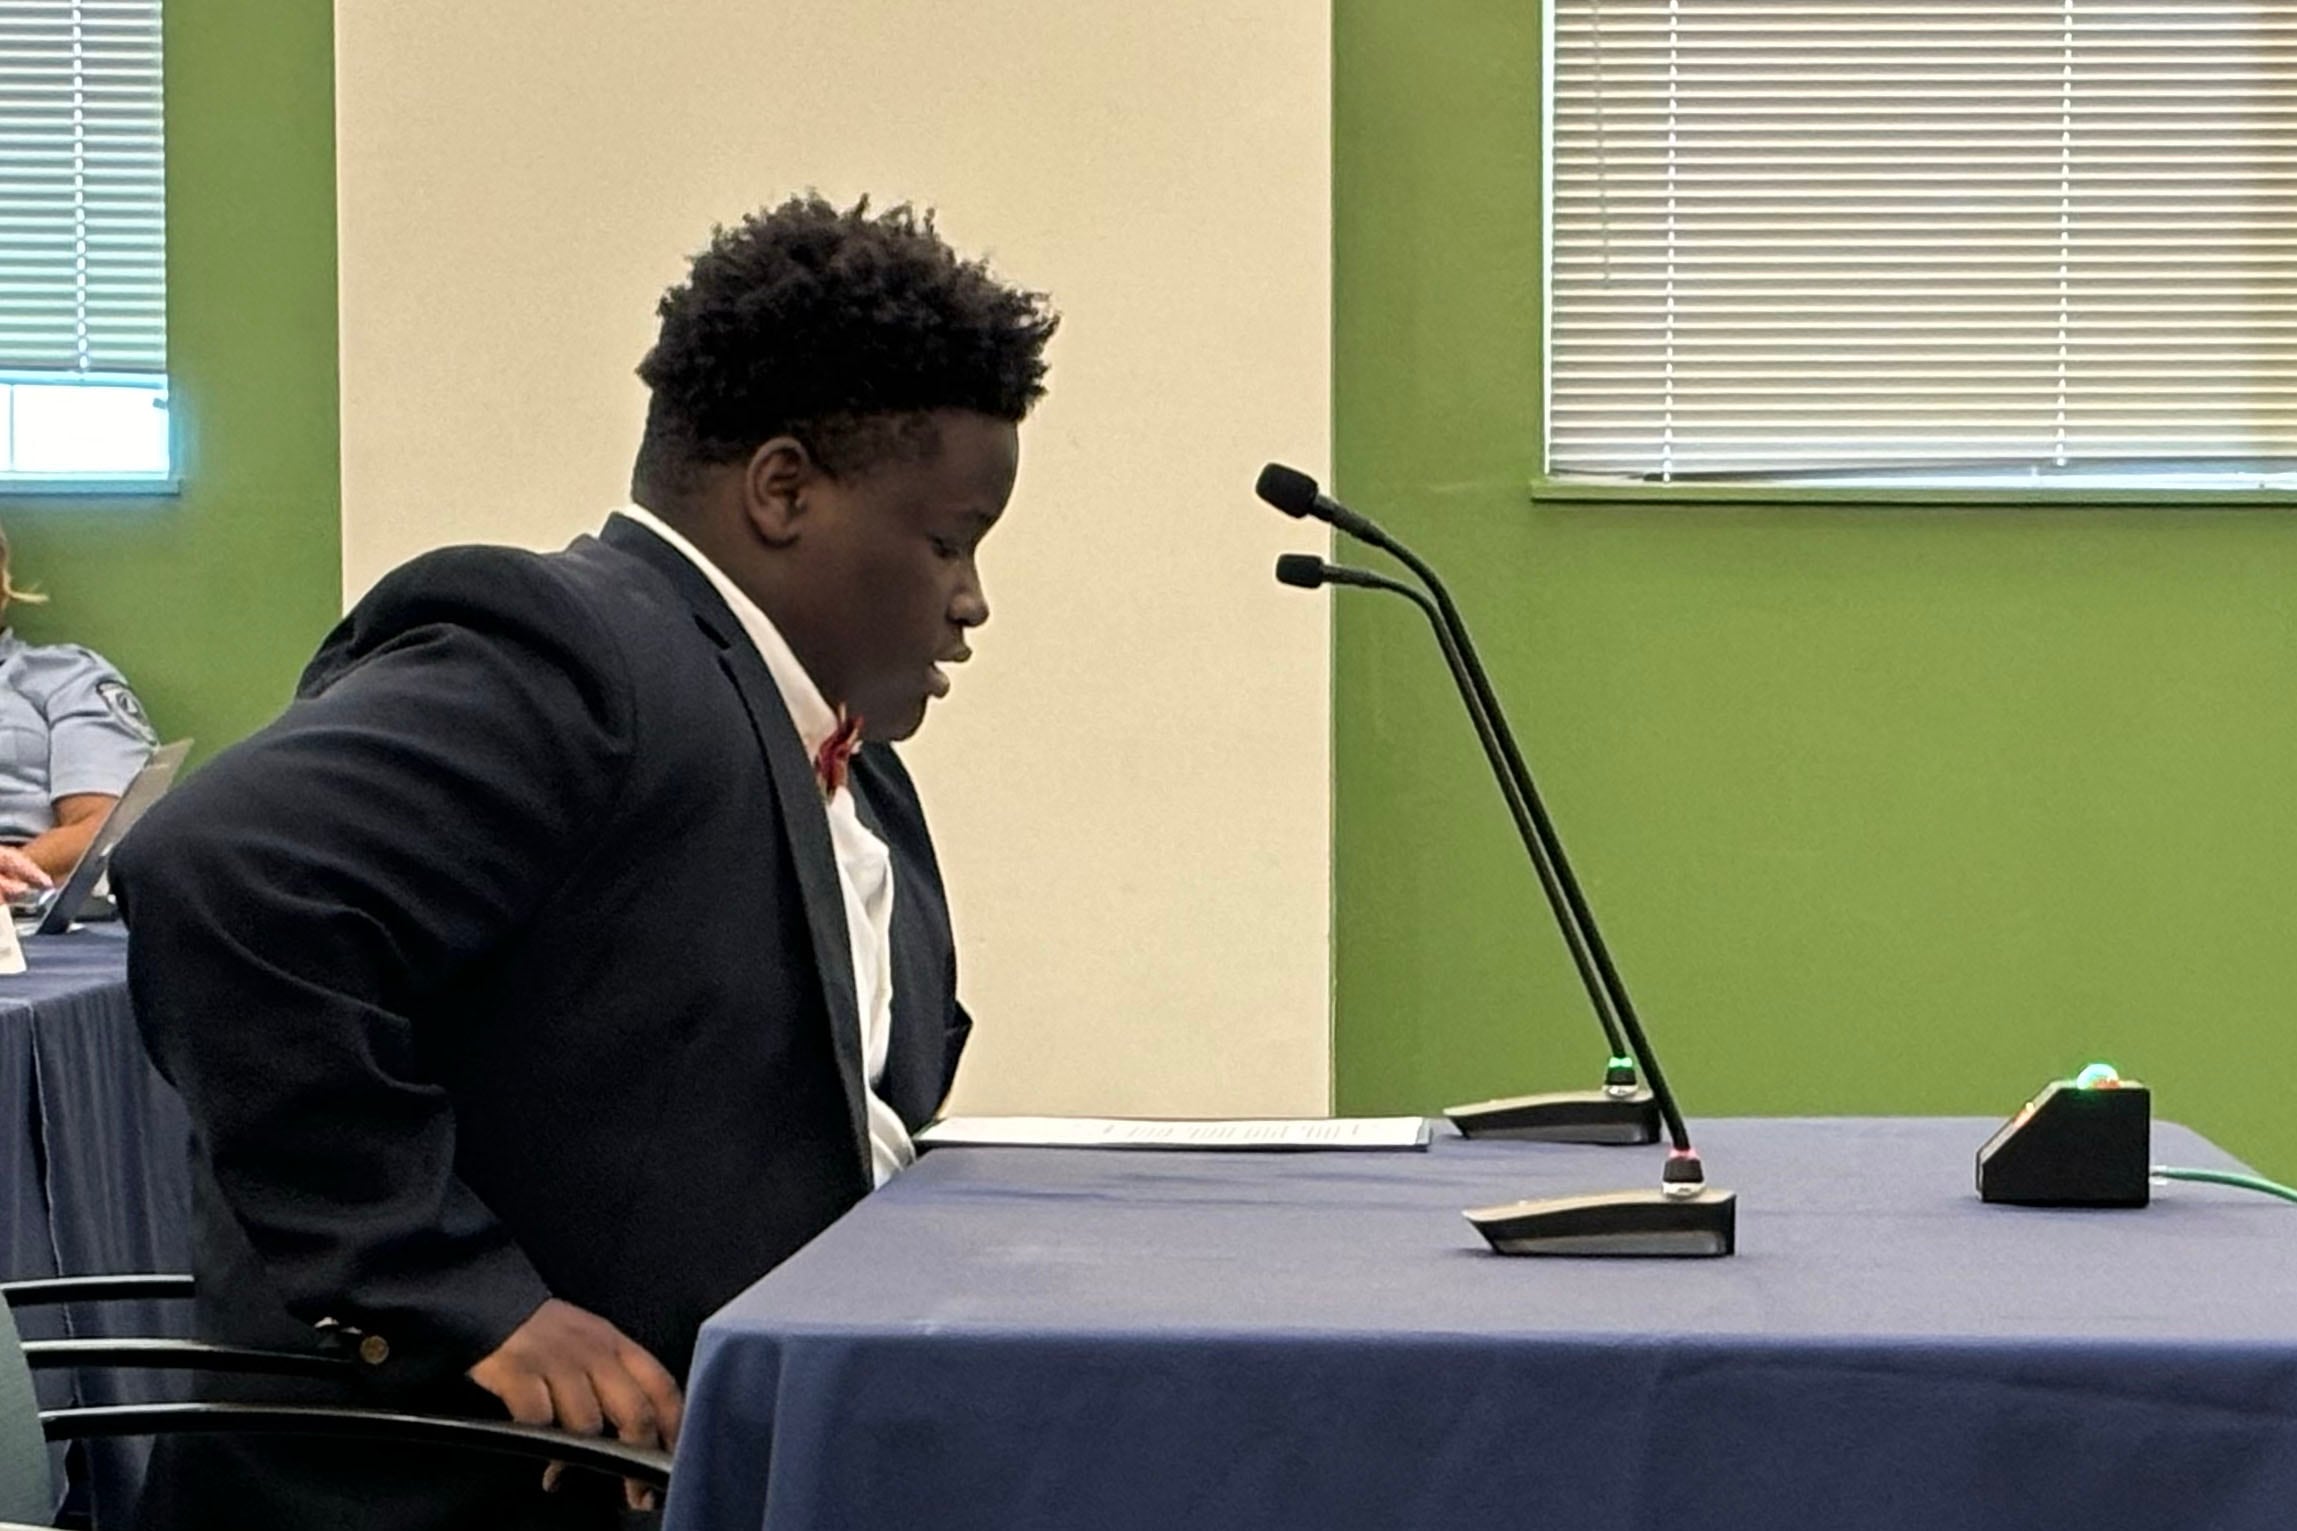 A high school student with short dark hair and wearing a dark suit sits at a table while speaking into a microphone with a white and green wall in the background.